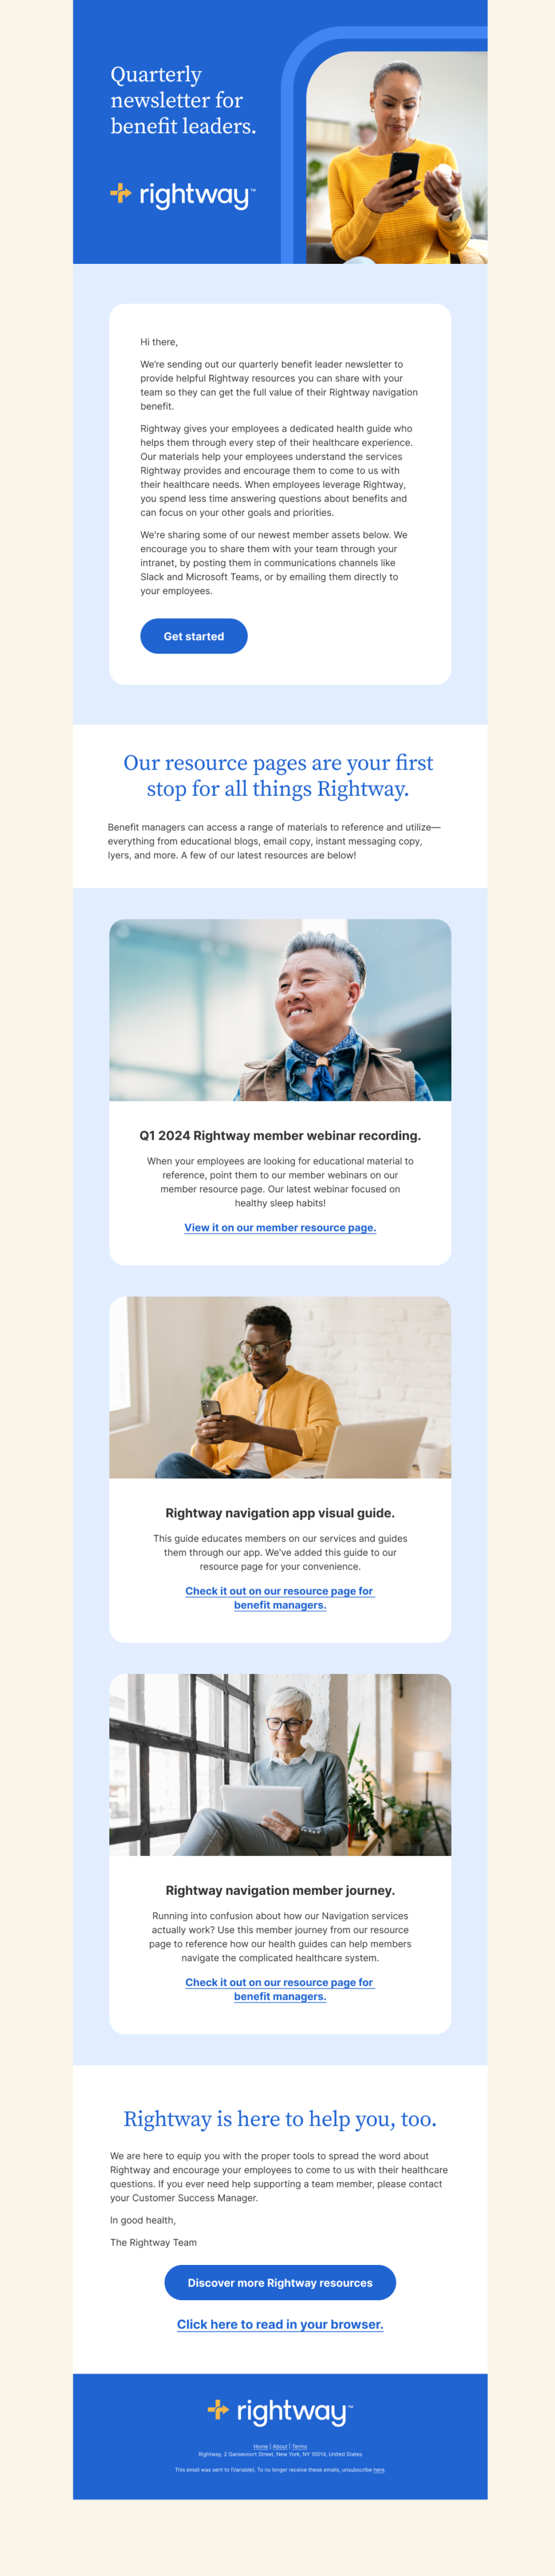 Rightway Benefit Manager Email Concept 3